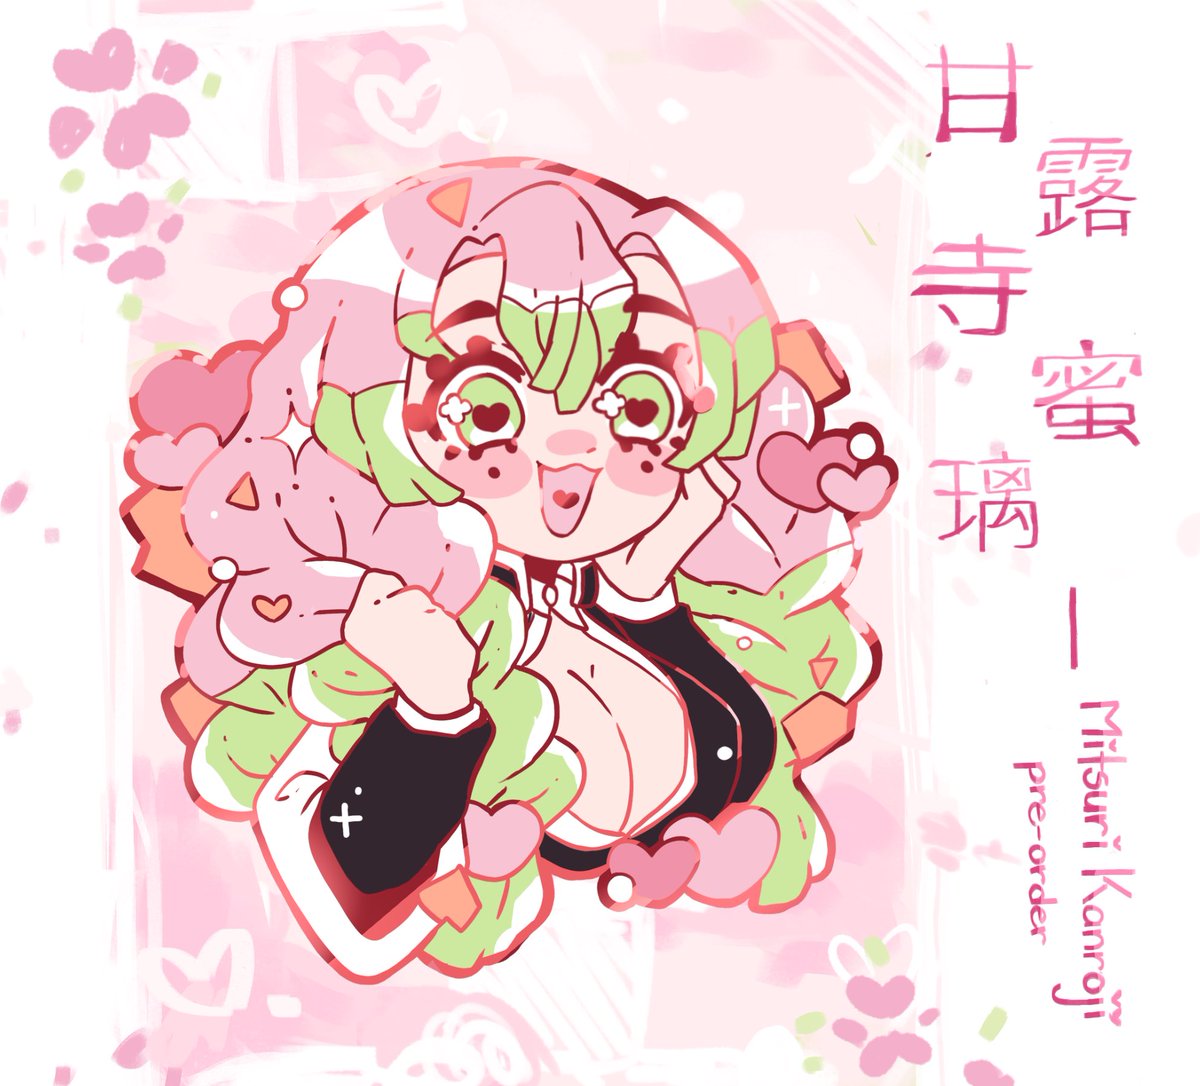 HEYYY GUYSSSSSSSS

🌸 Mitsuri Kanroji Pin Preorder will be up in my shop this Saturday at 12 PM PST! 🌸✨ 